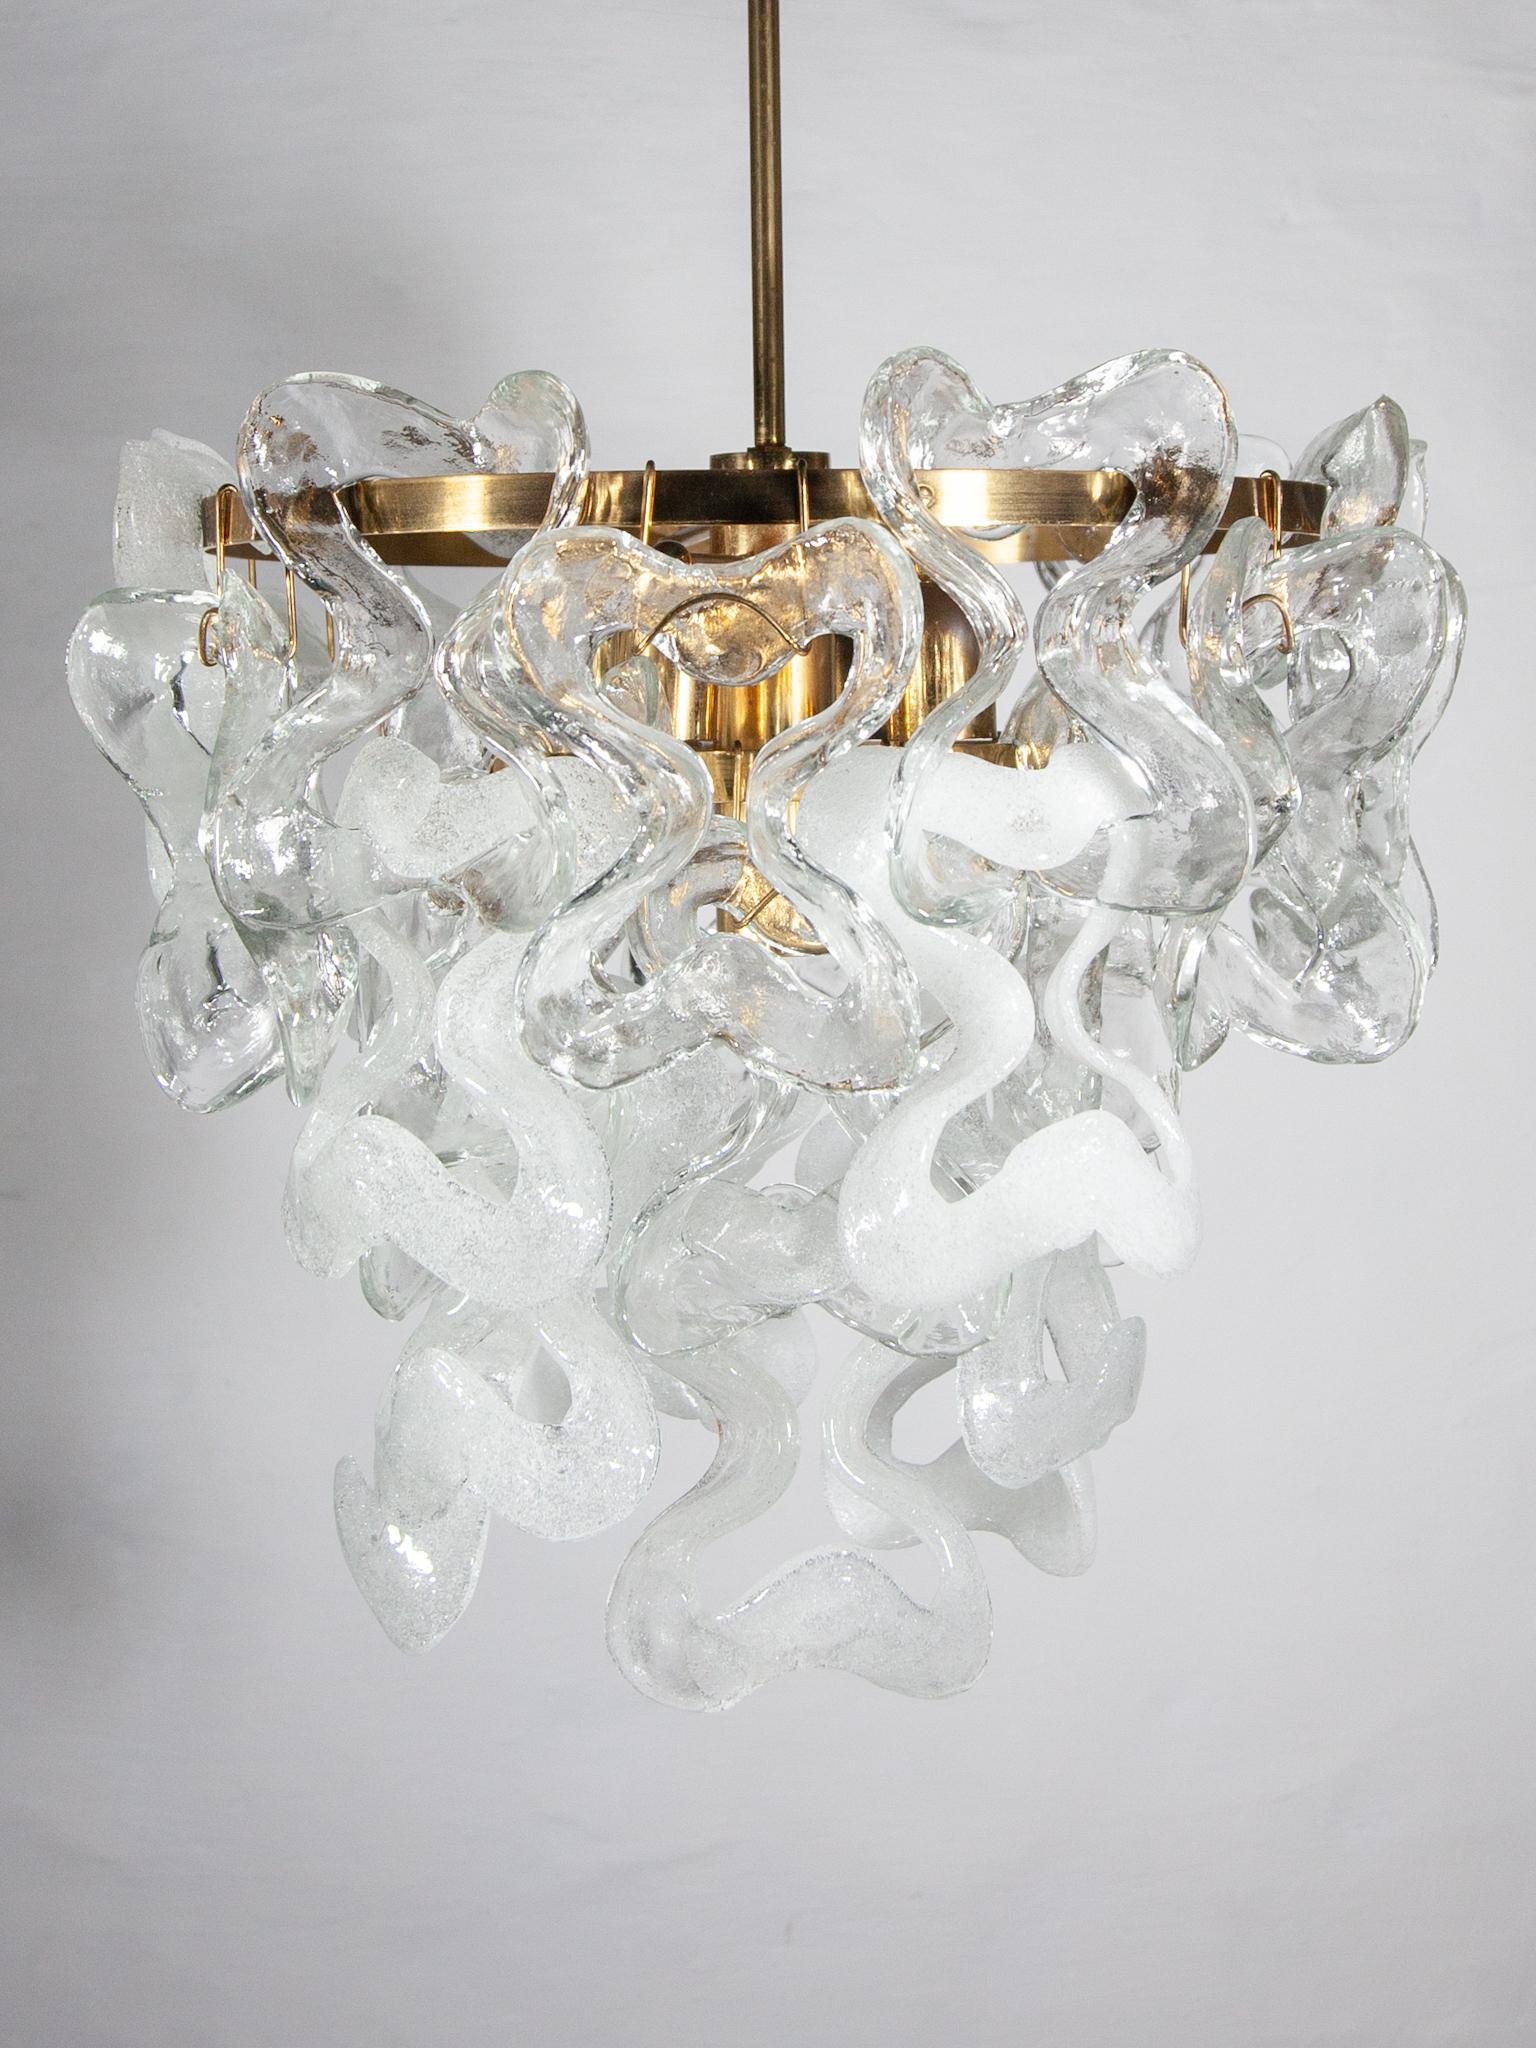 Mazzega Interlocking Glass Panels Chandelier 1960s In Good Condition For Sale In Antwerp, BE